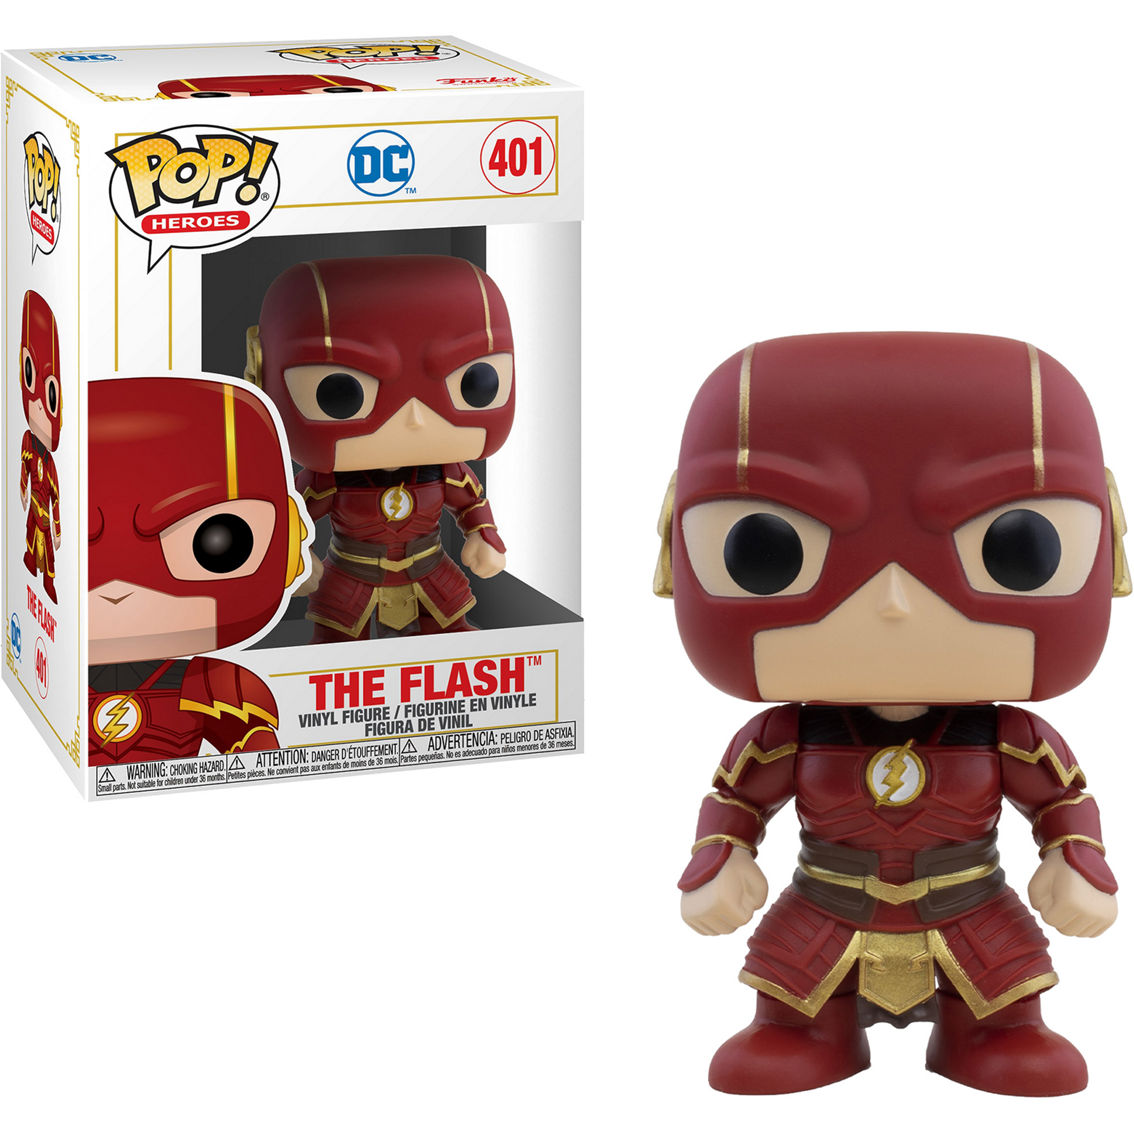 Funko POP! DC Heroes Imperial Palace Collector's Set - Image 4 of 7